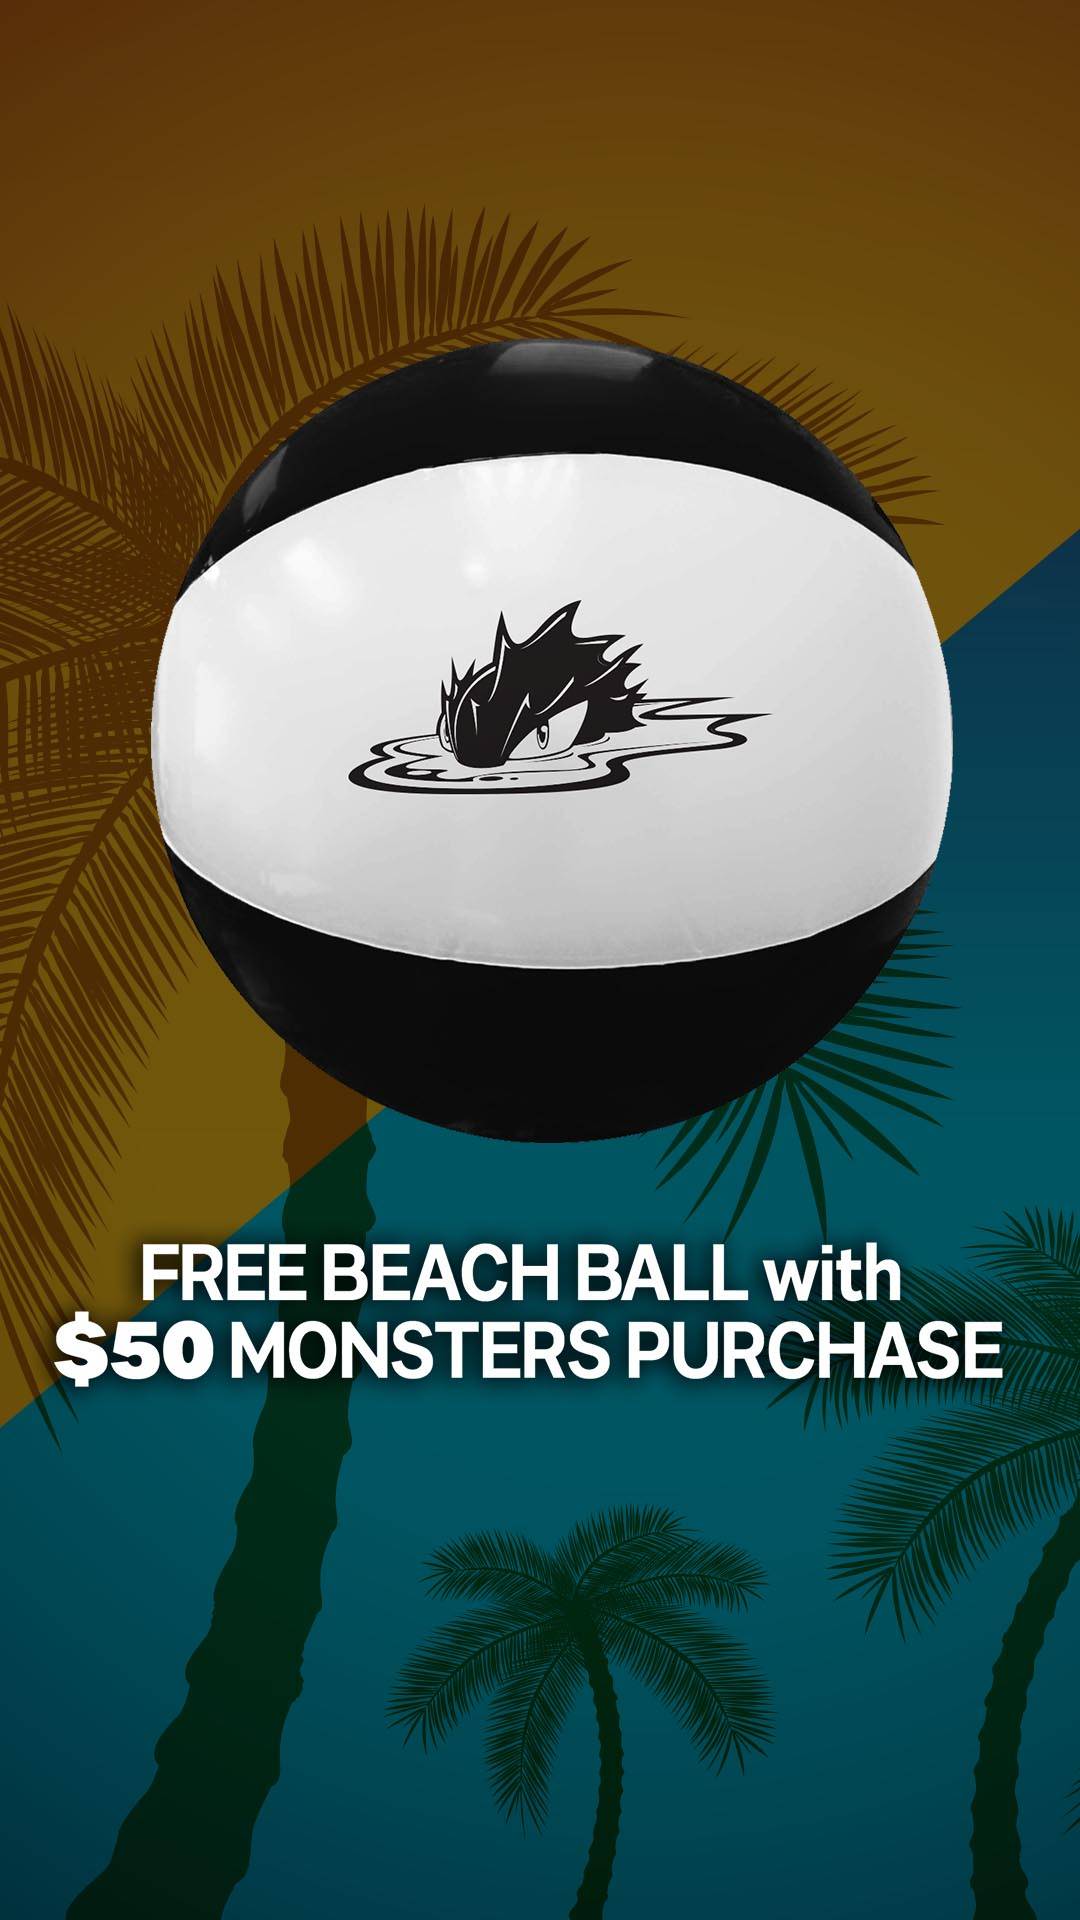 Get a FREE inflatable beach ball with your $50 Monsters purchase! Item added to qualifying carts automatically; available while supplies last. 